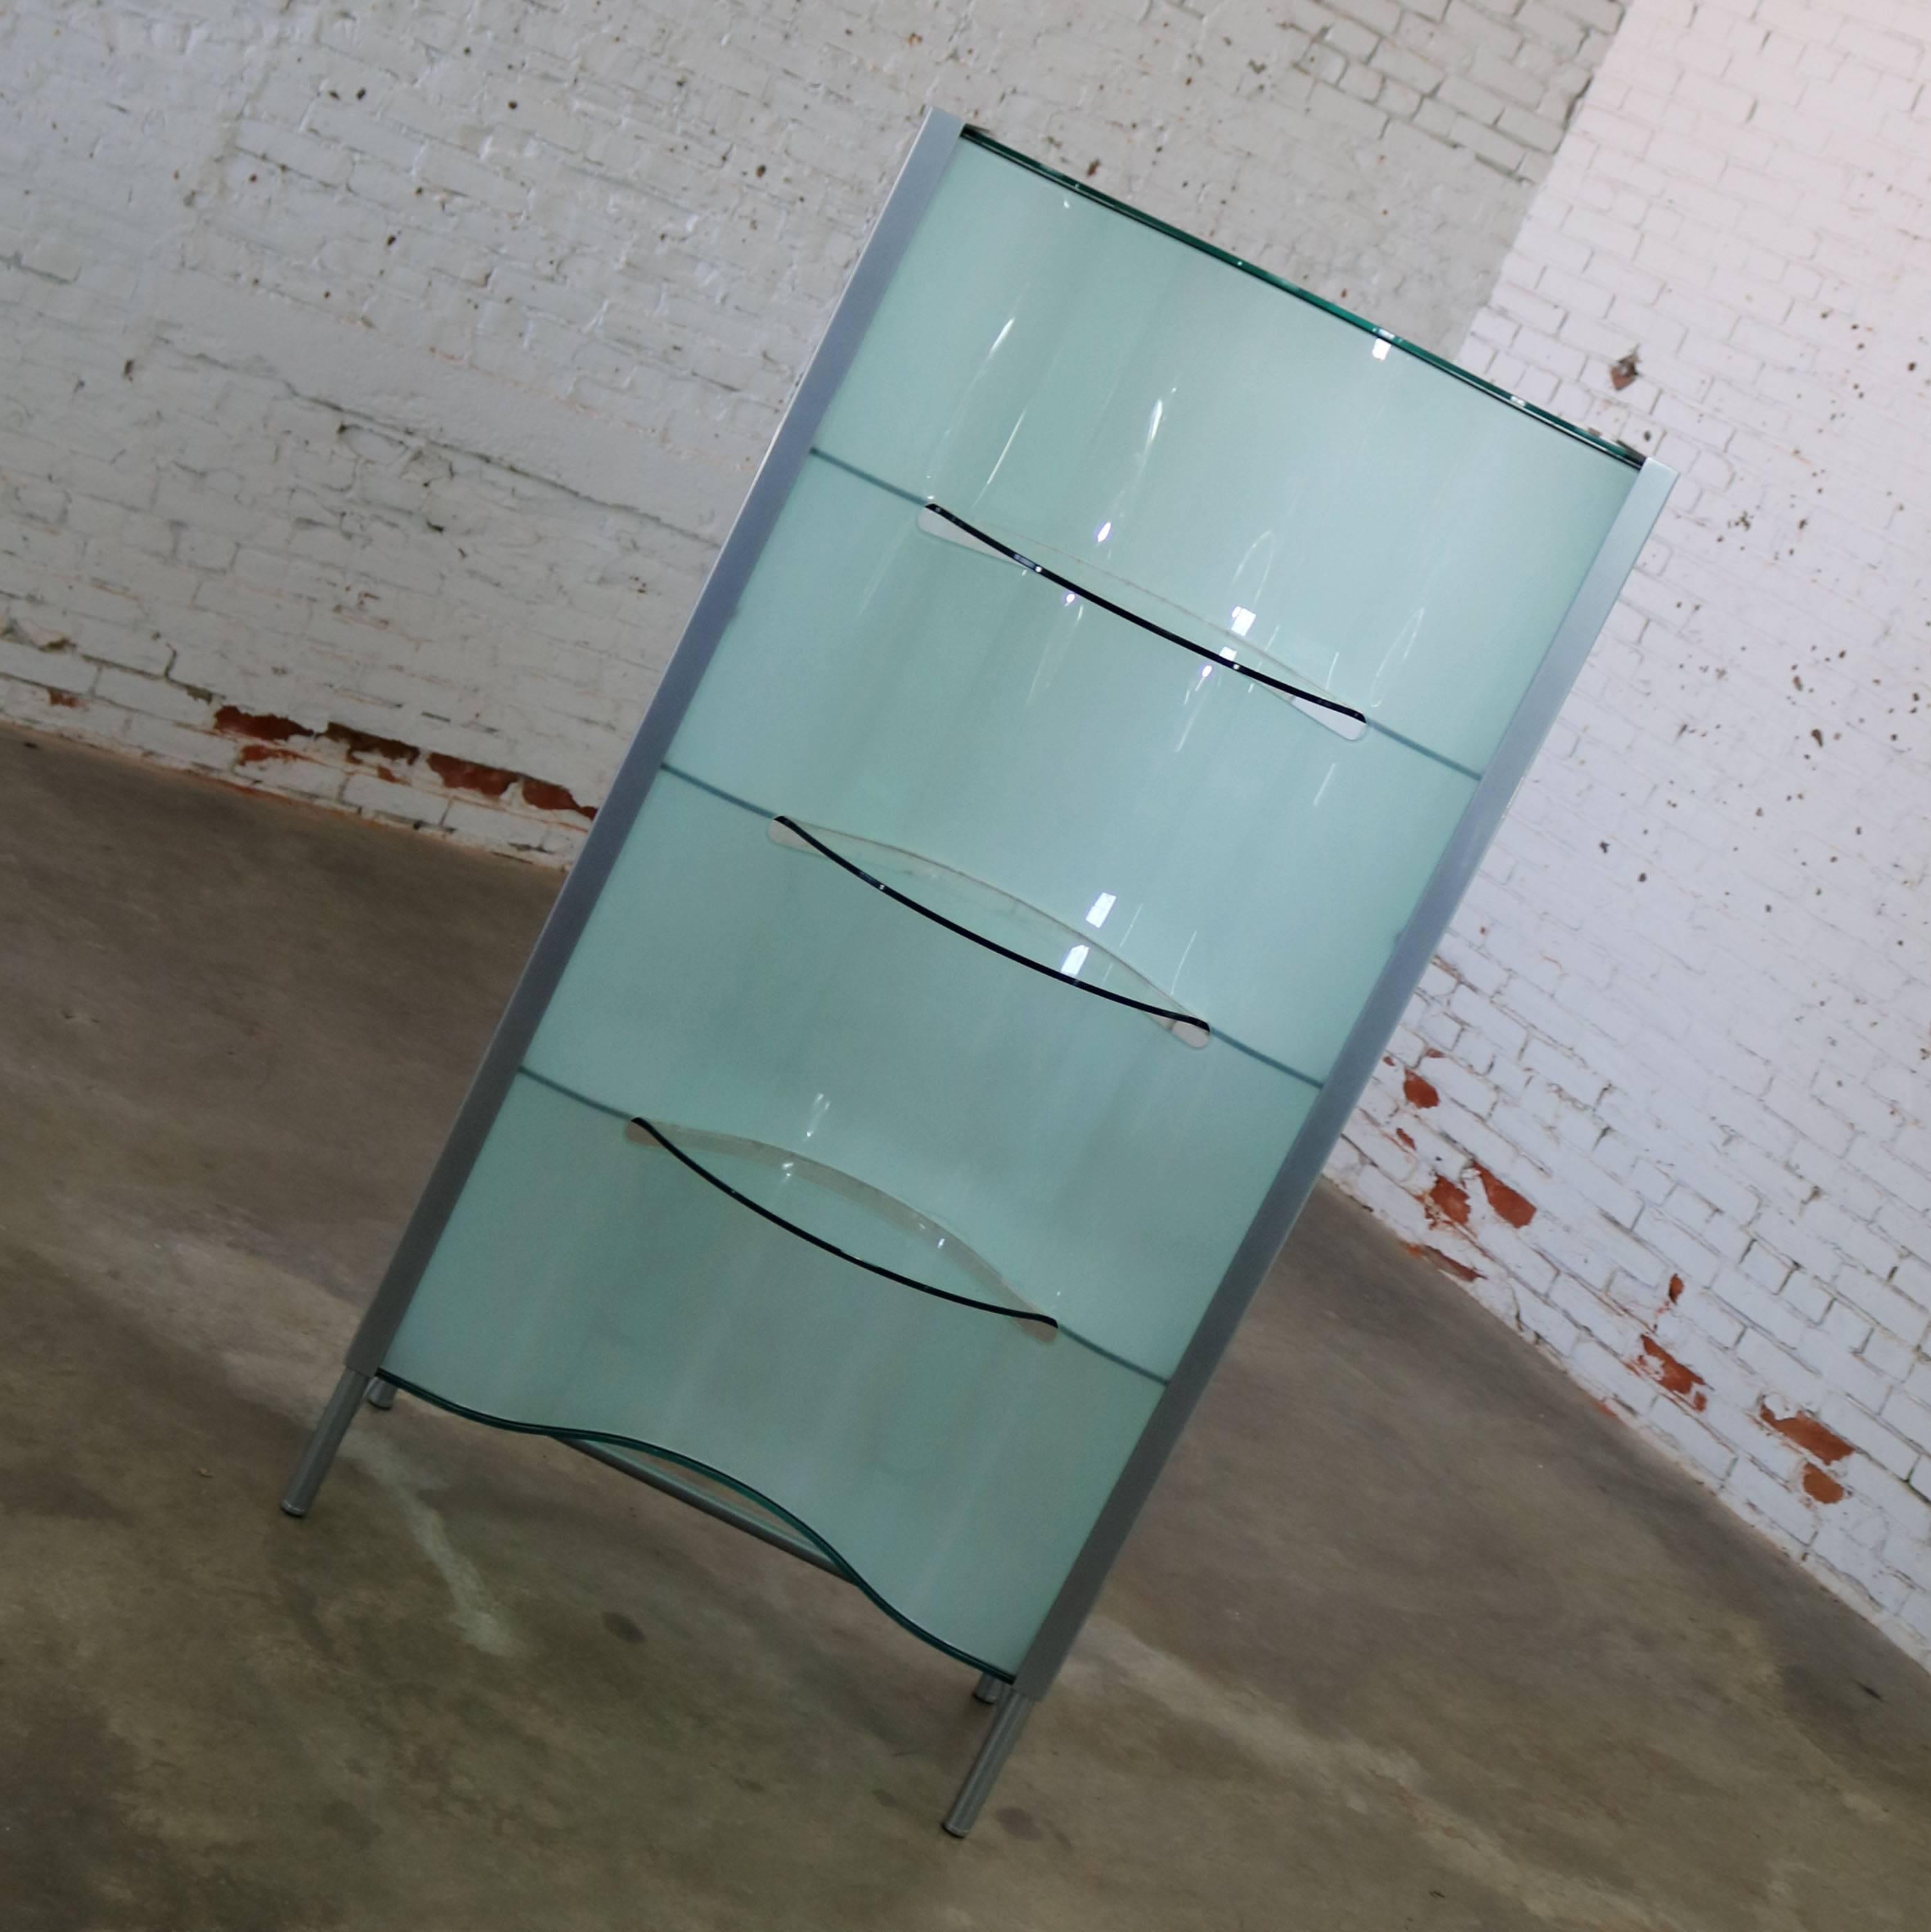 Offering a modern dual sided translucent glass and frosted glass enclosed display cabinet, vitrine, étagère, or room divider with metal frame and legs. This piece is in fabulous condition with no flaws that we have found, circa 21st century.

This